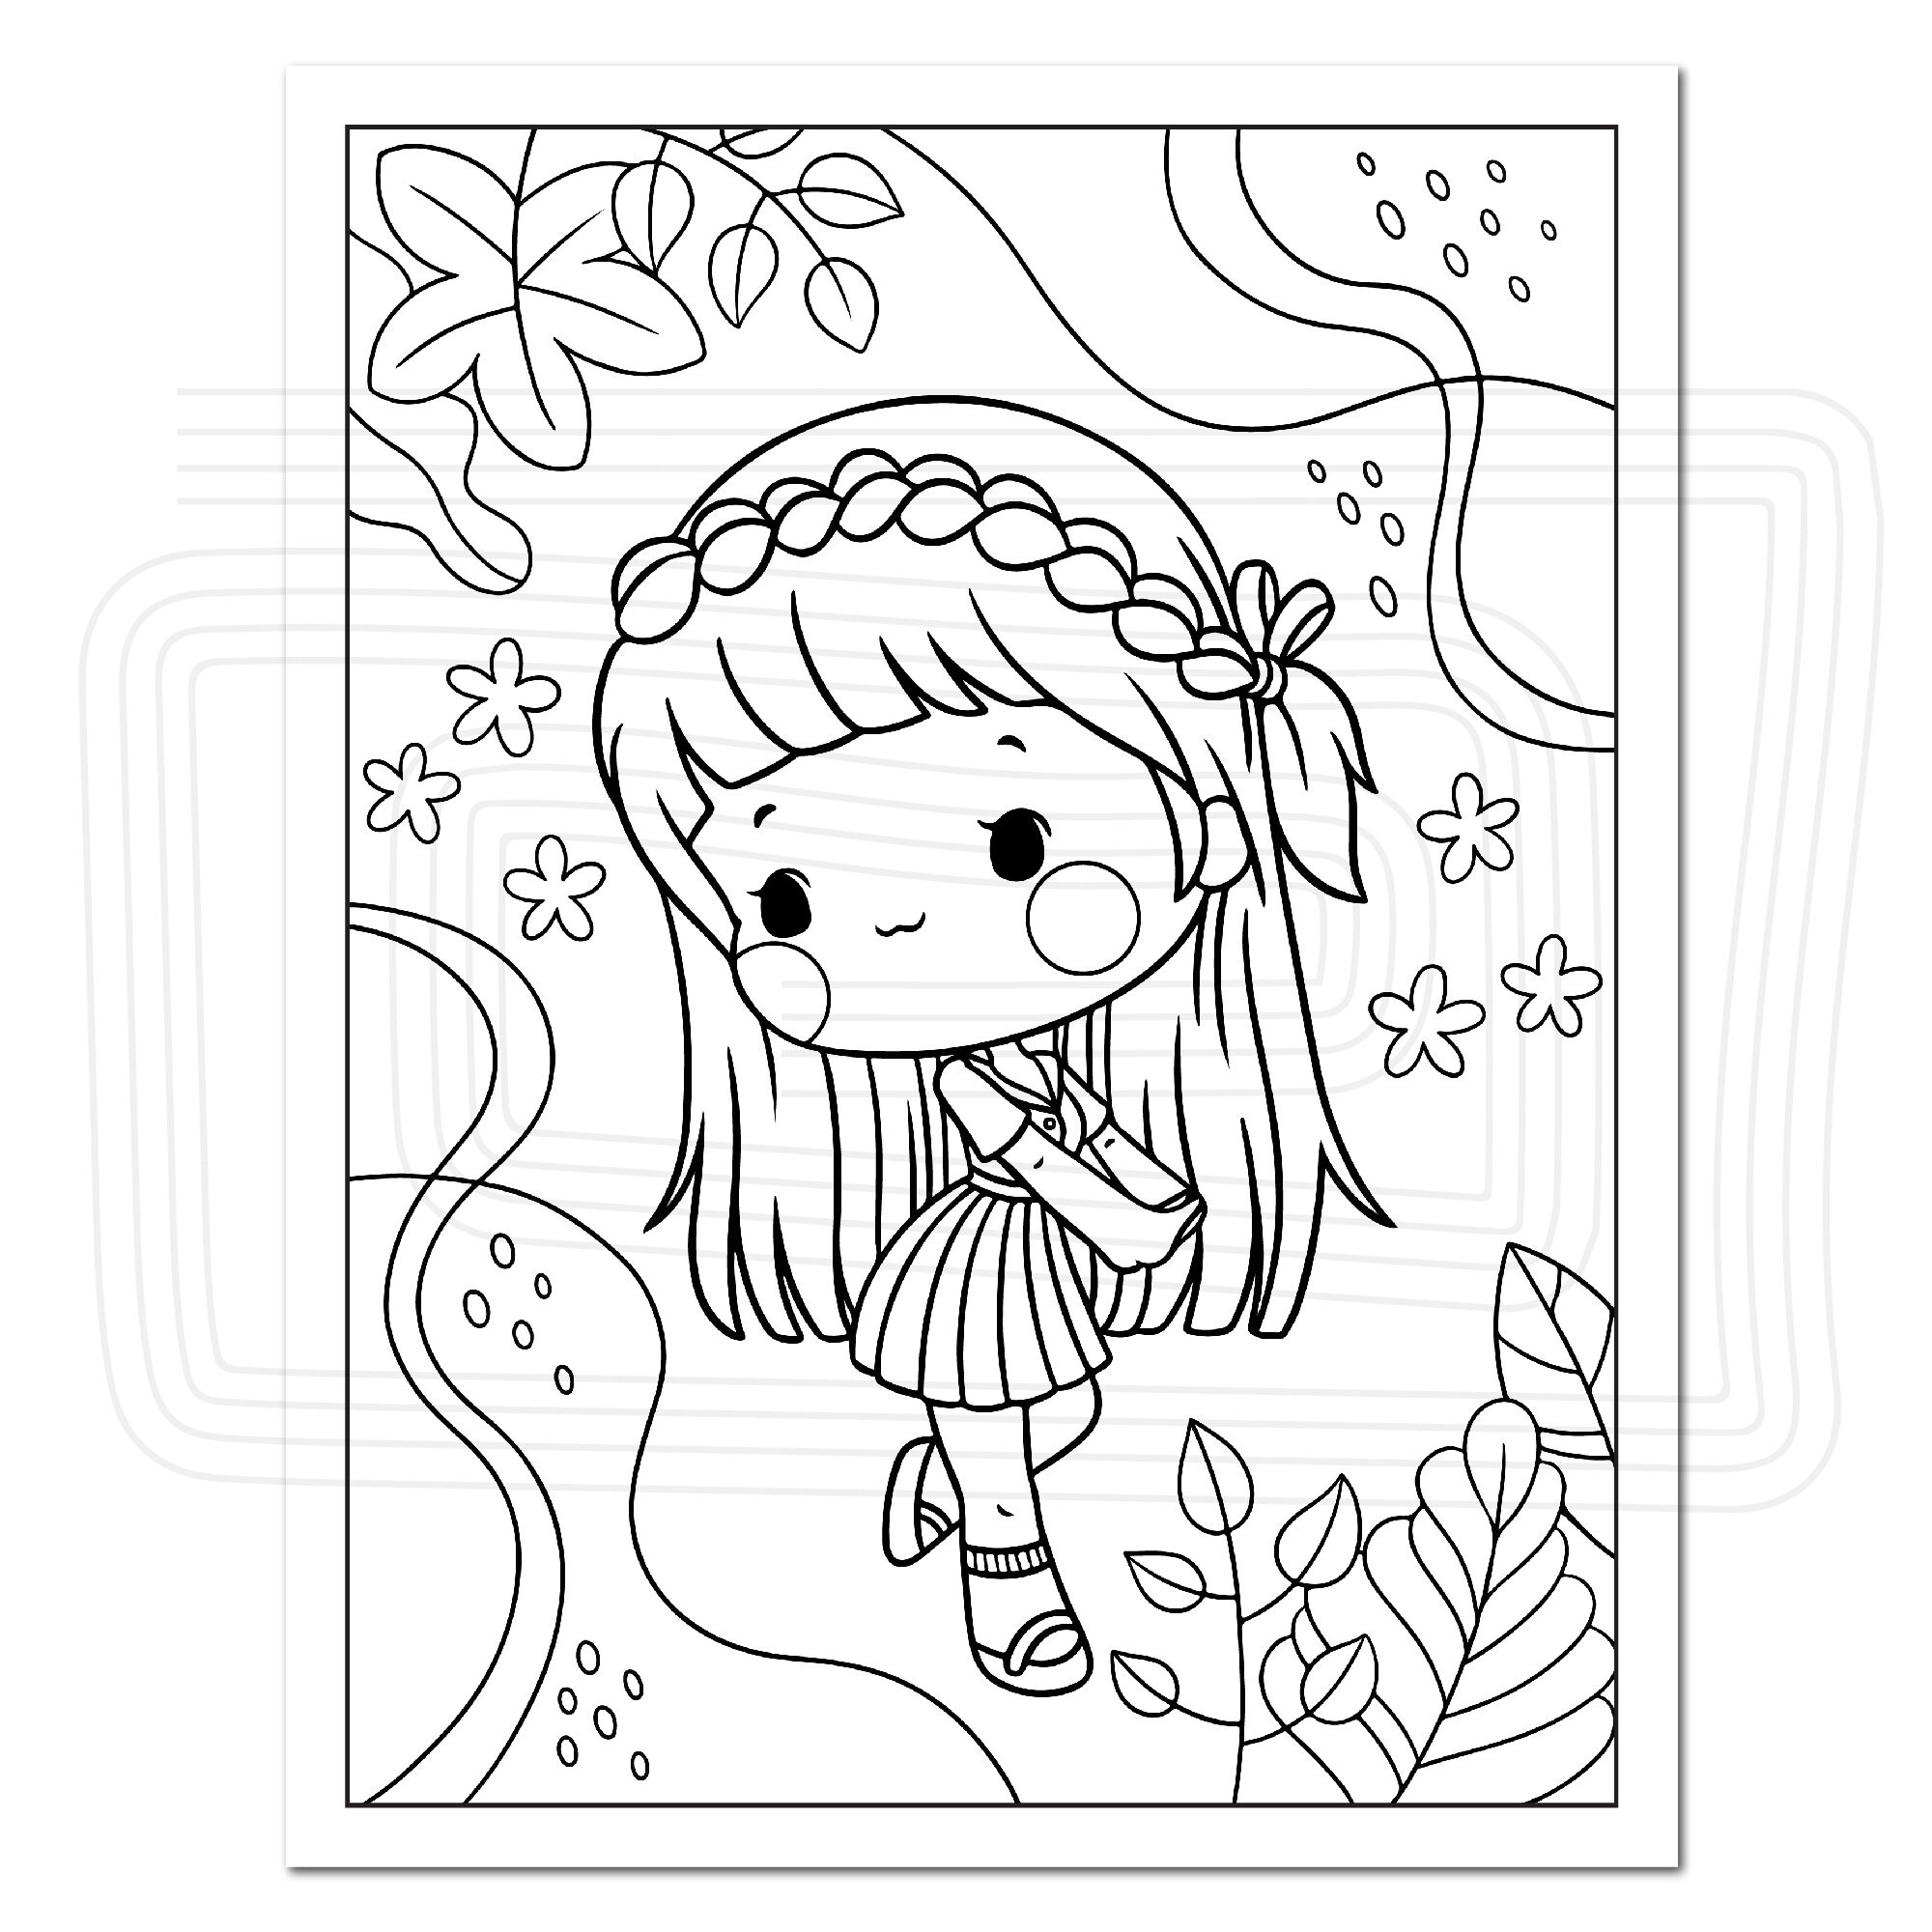 Girl Coloring Pages Stock Illustrations – 2,723 Girl Coloring